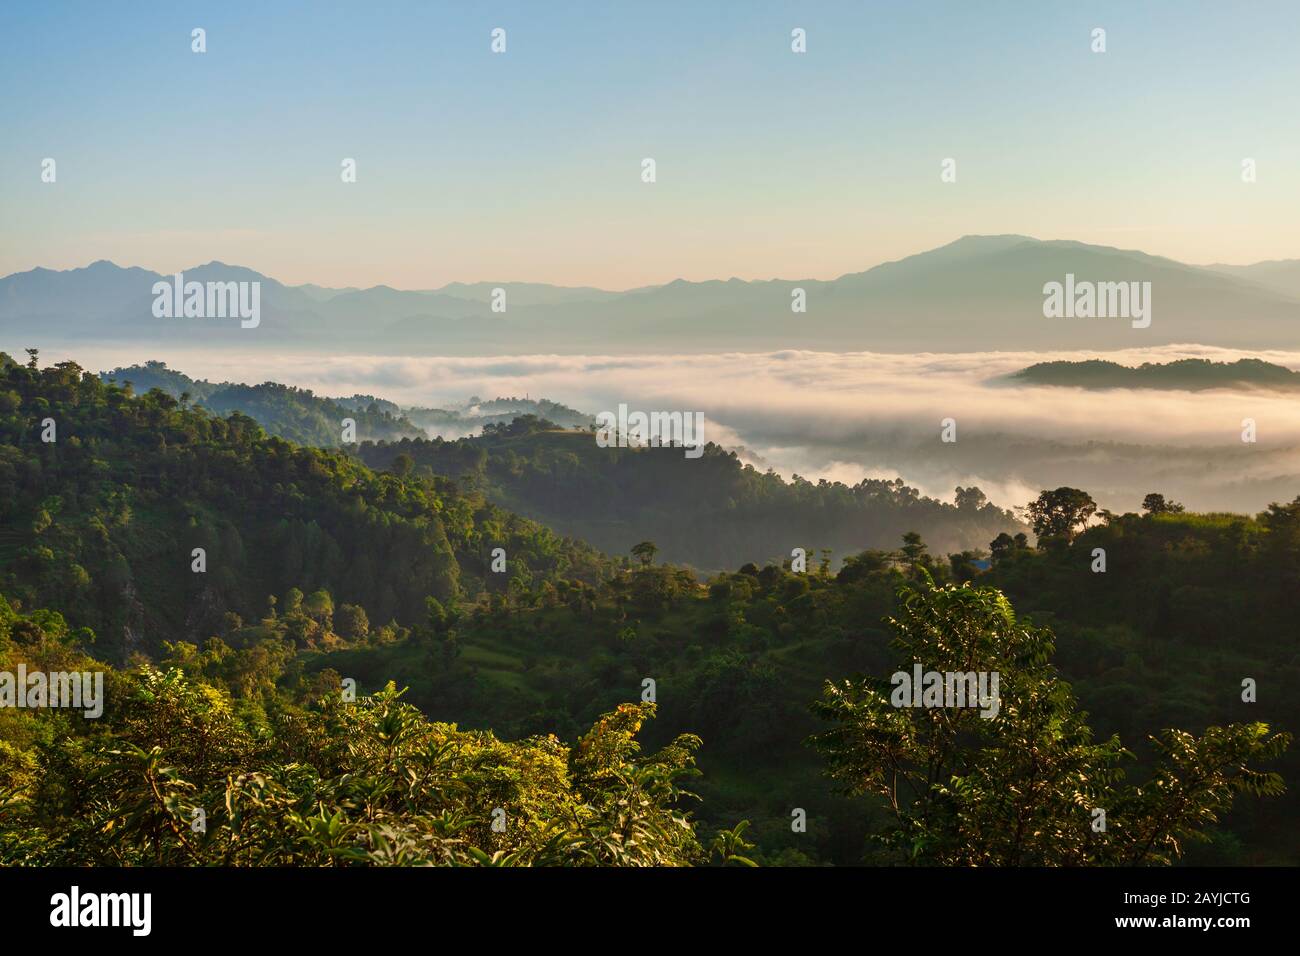 Scenic landscape view of the forested mountain slope in mist and clouds at sunrise, Himalaya mountains in Himachal Pradesh, India Stock Photo